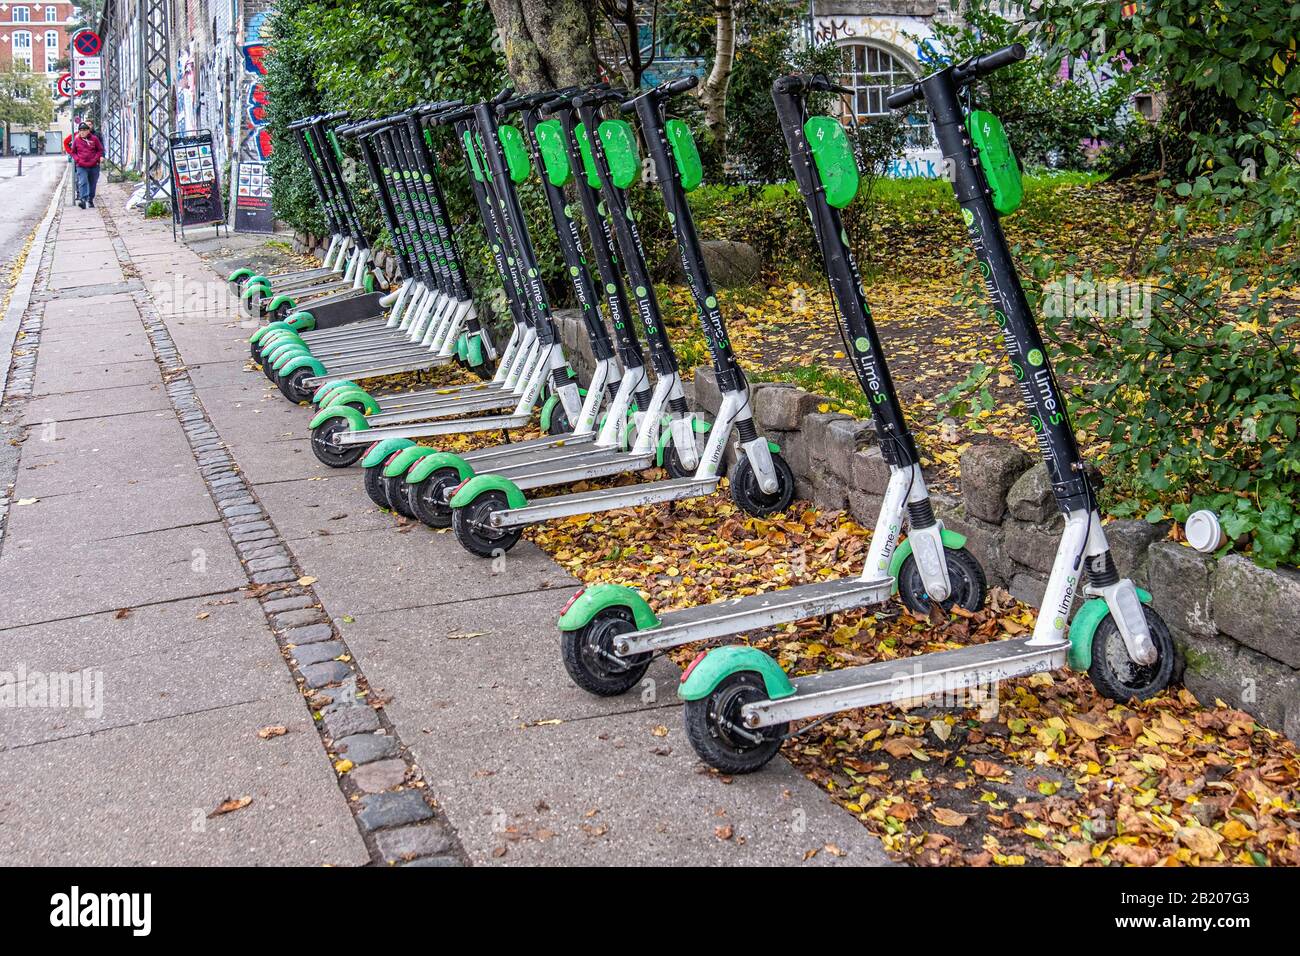 badning generelt trappe Row of Lime Rental E-scooters parked in Prensessegade street, Christiana,  Copenhagen Stock Photo - Alamy